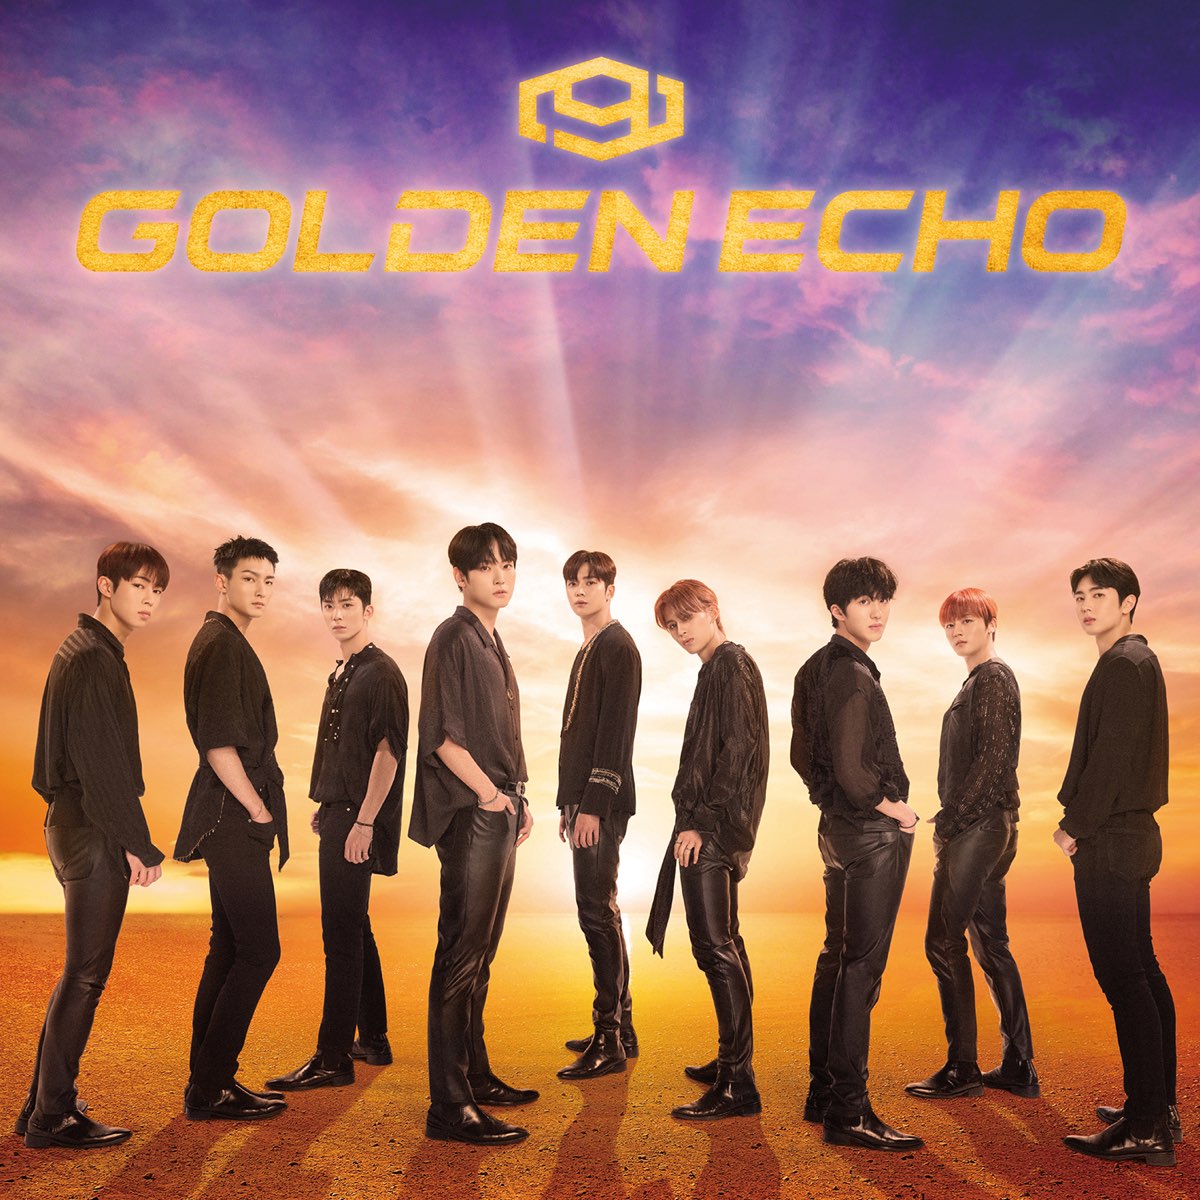 GOLDEN ECHO by SF9 on Apple Music